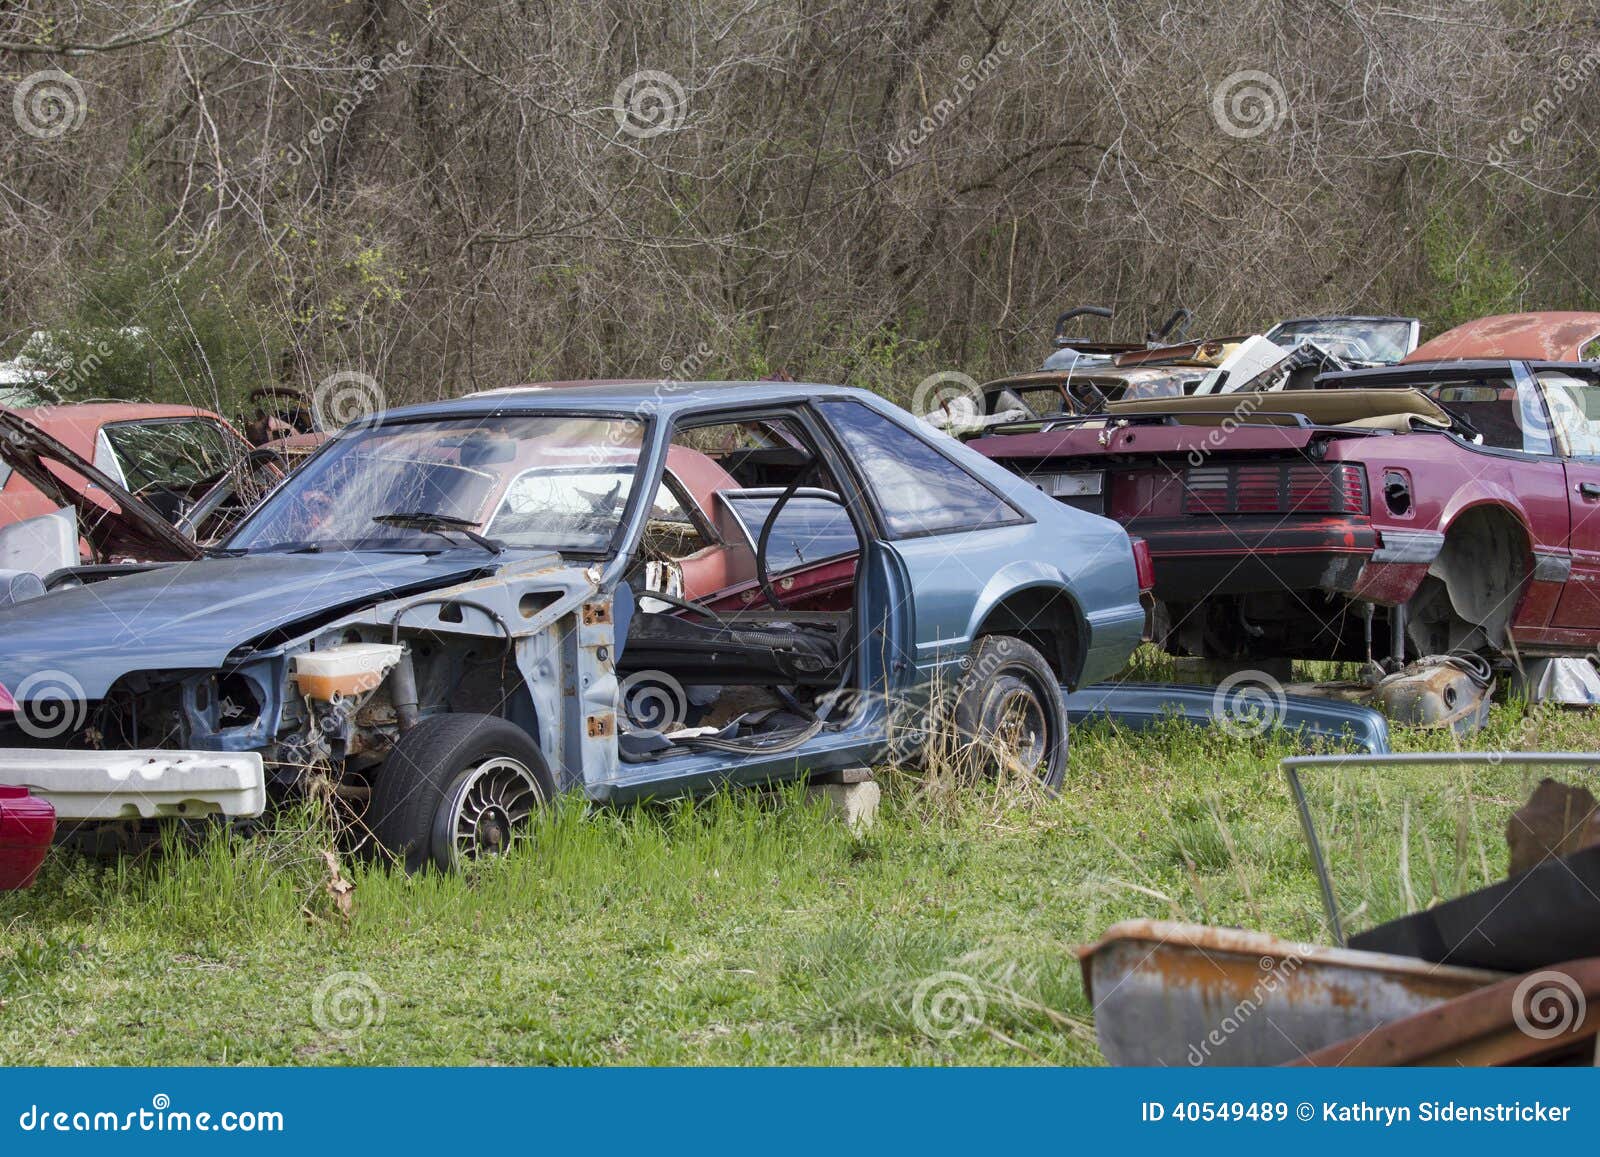 a pair of 1990's ford mustangs in the salvage yard